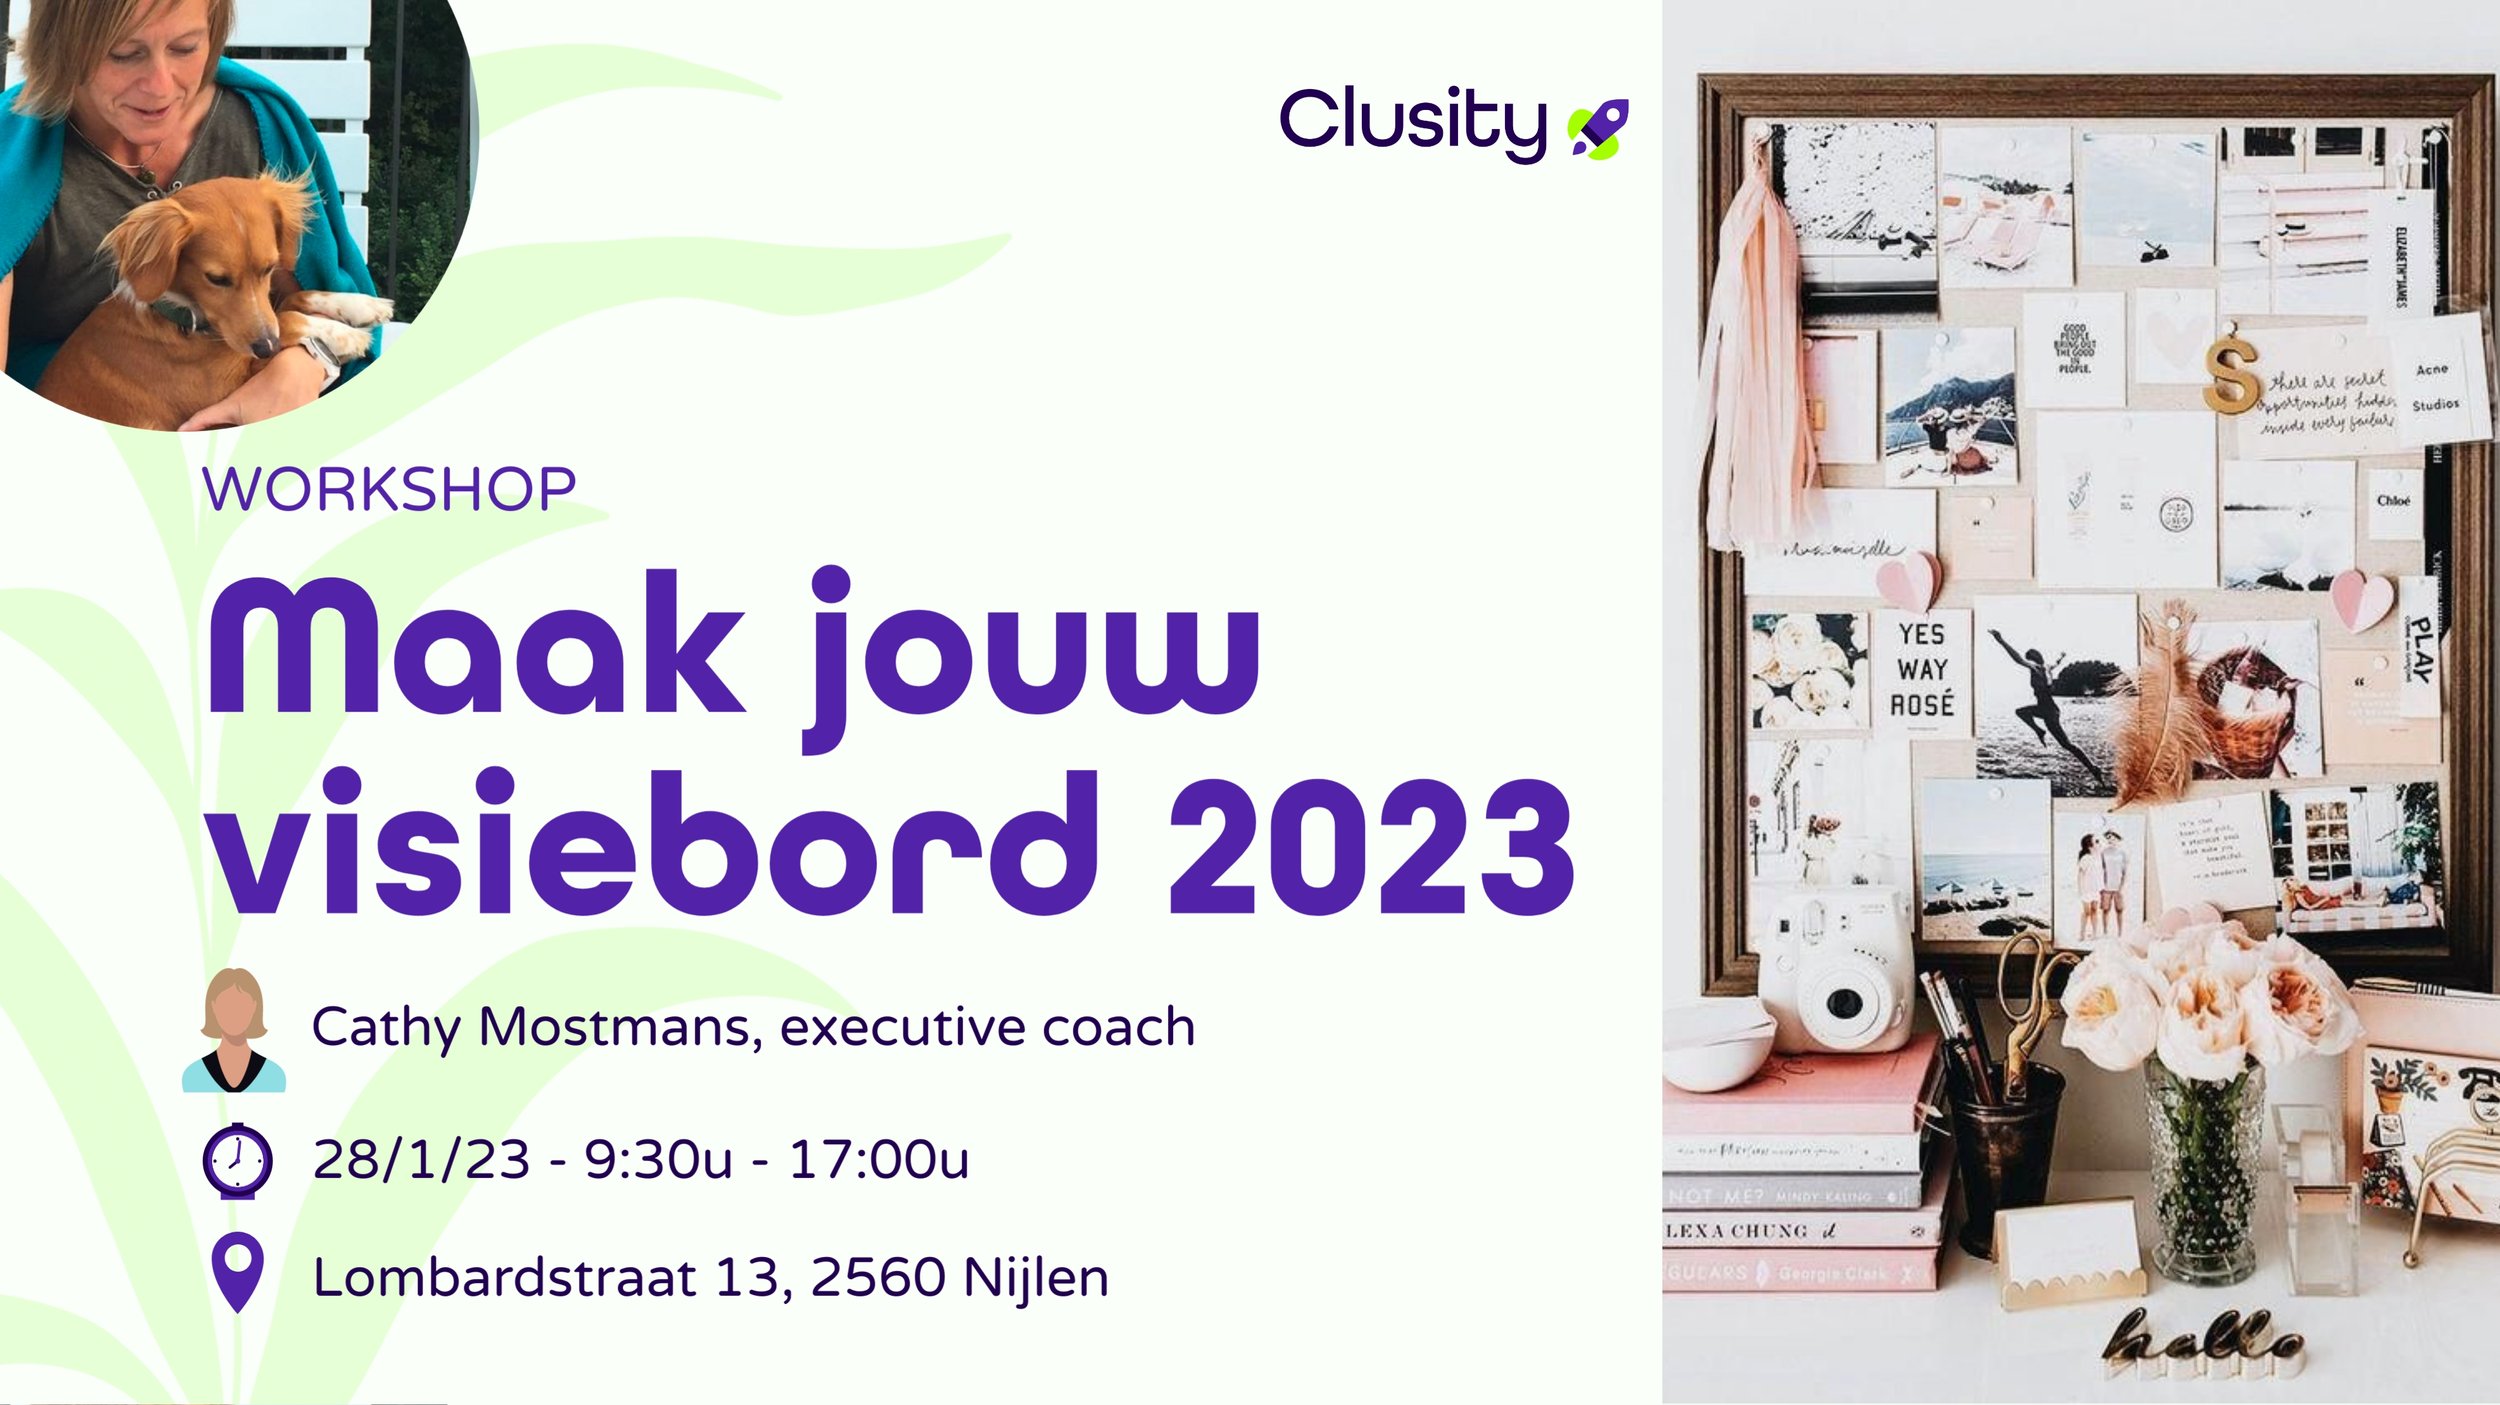 Workshop (1 day): Create your vision board for 2023